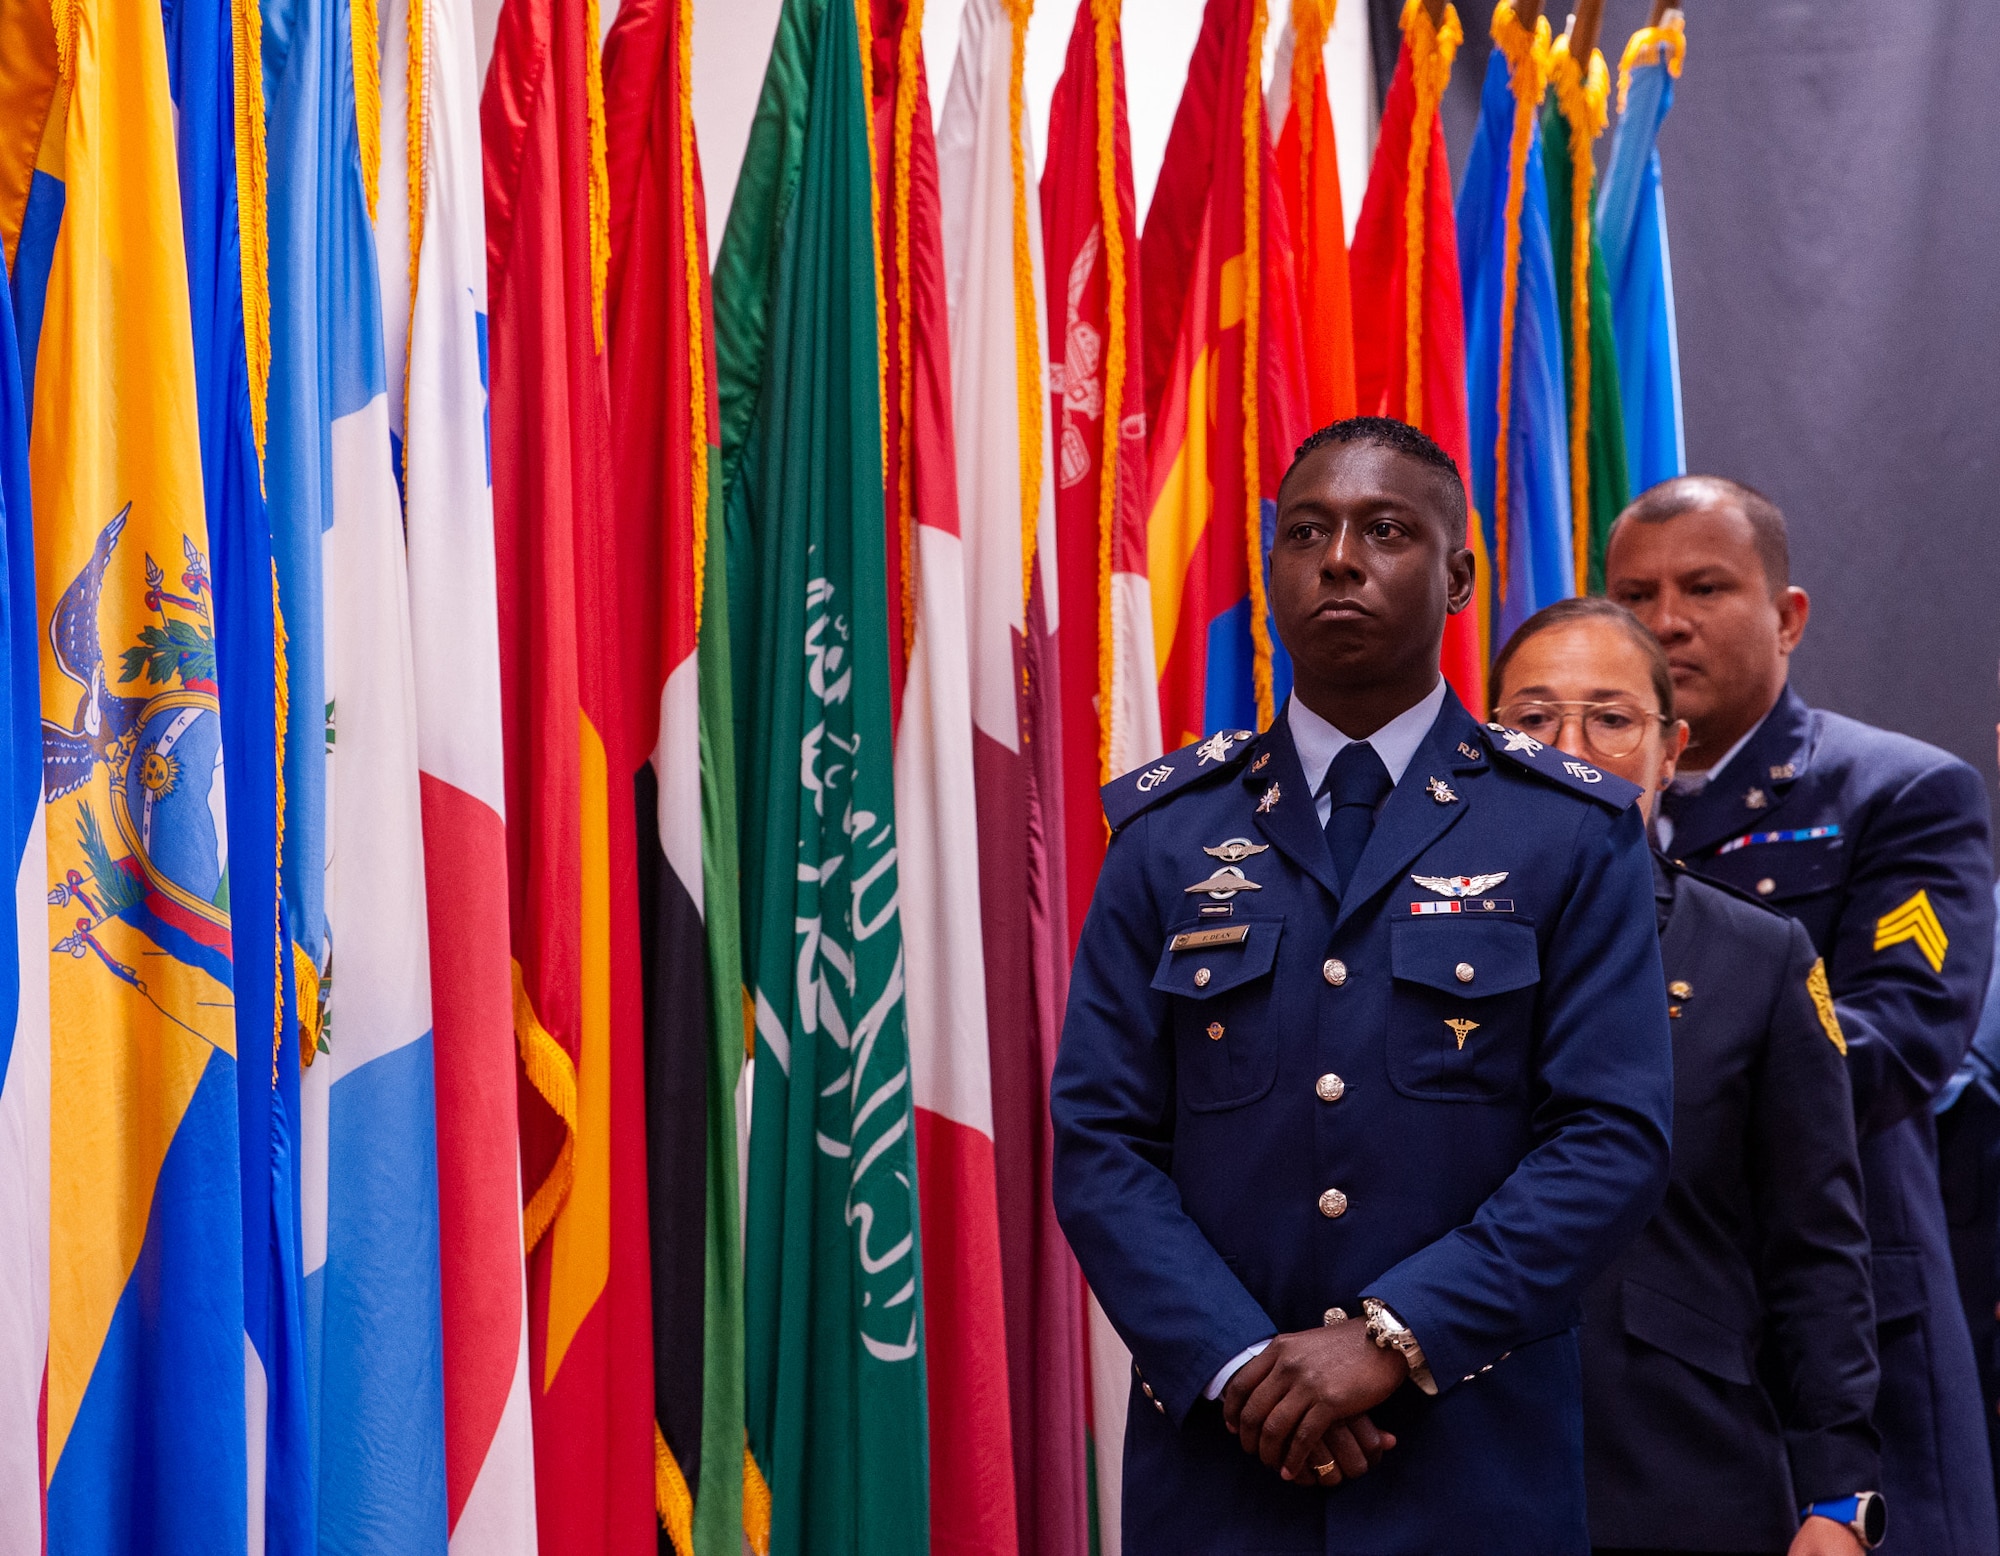 International students stand next to flags